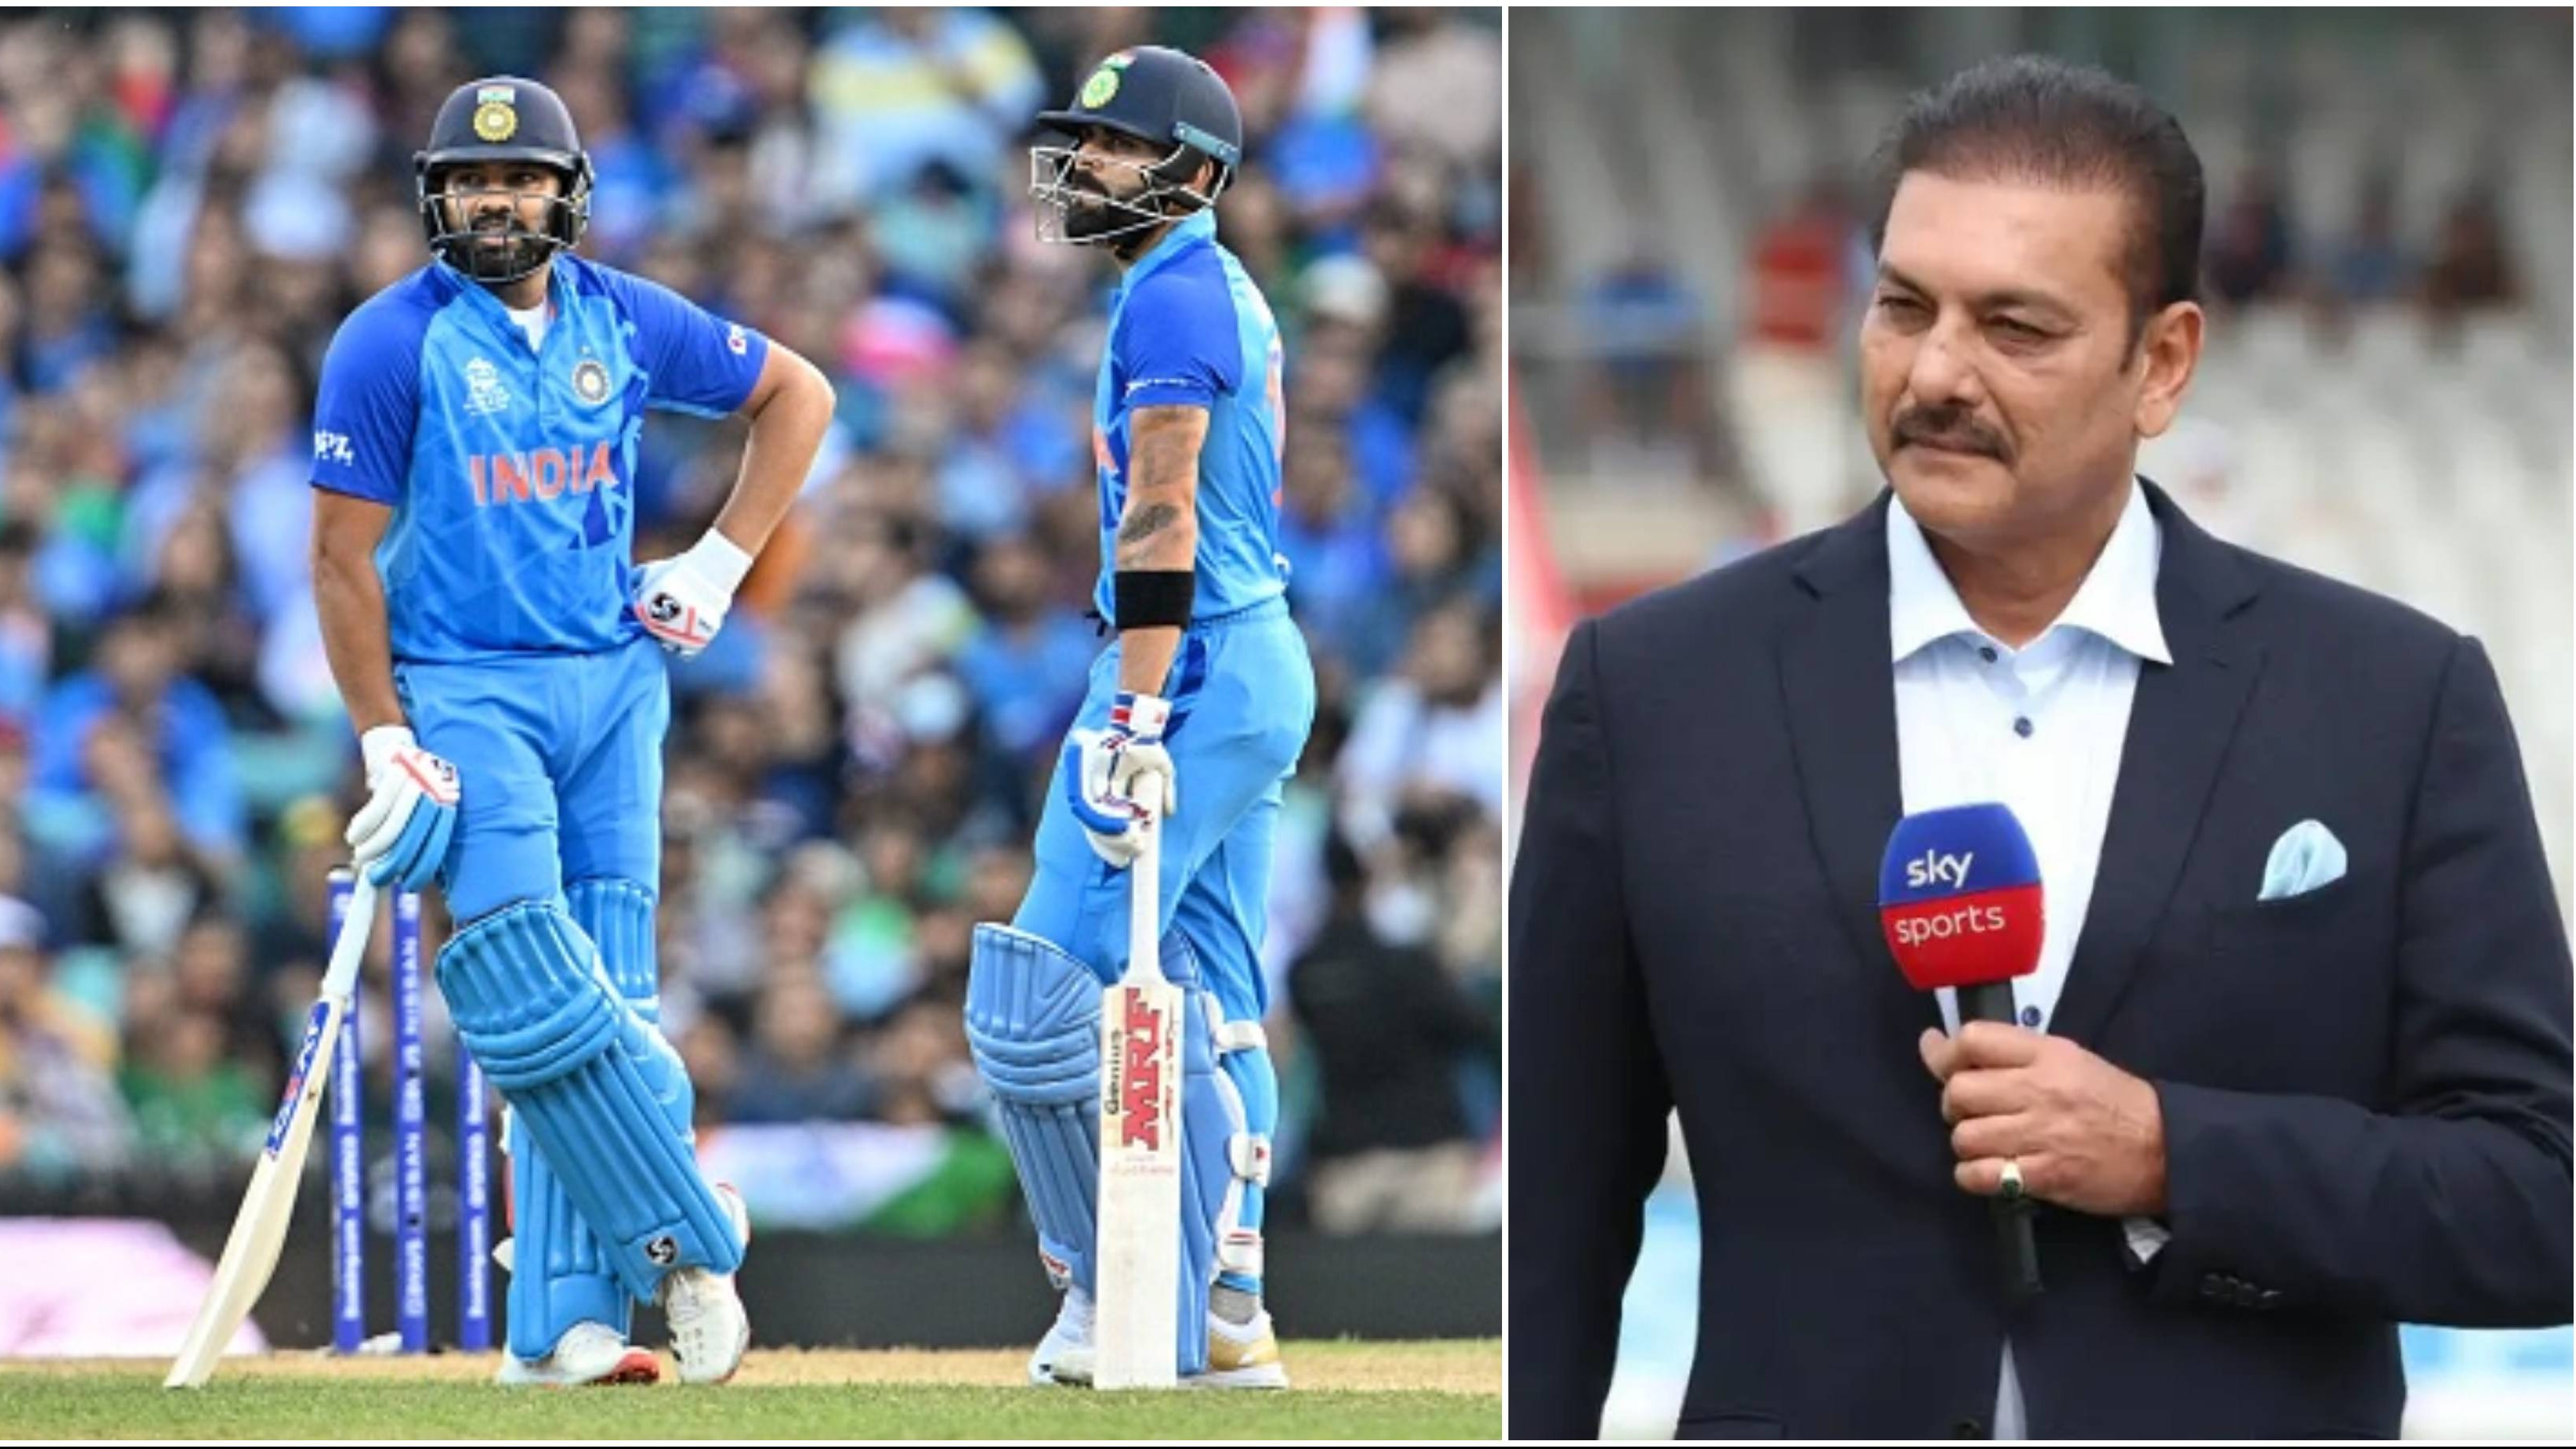 “There's too much cricket,” Shastri expects star players like Rohit Sharma and Virat Kohli to quit one format